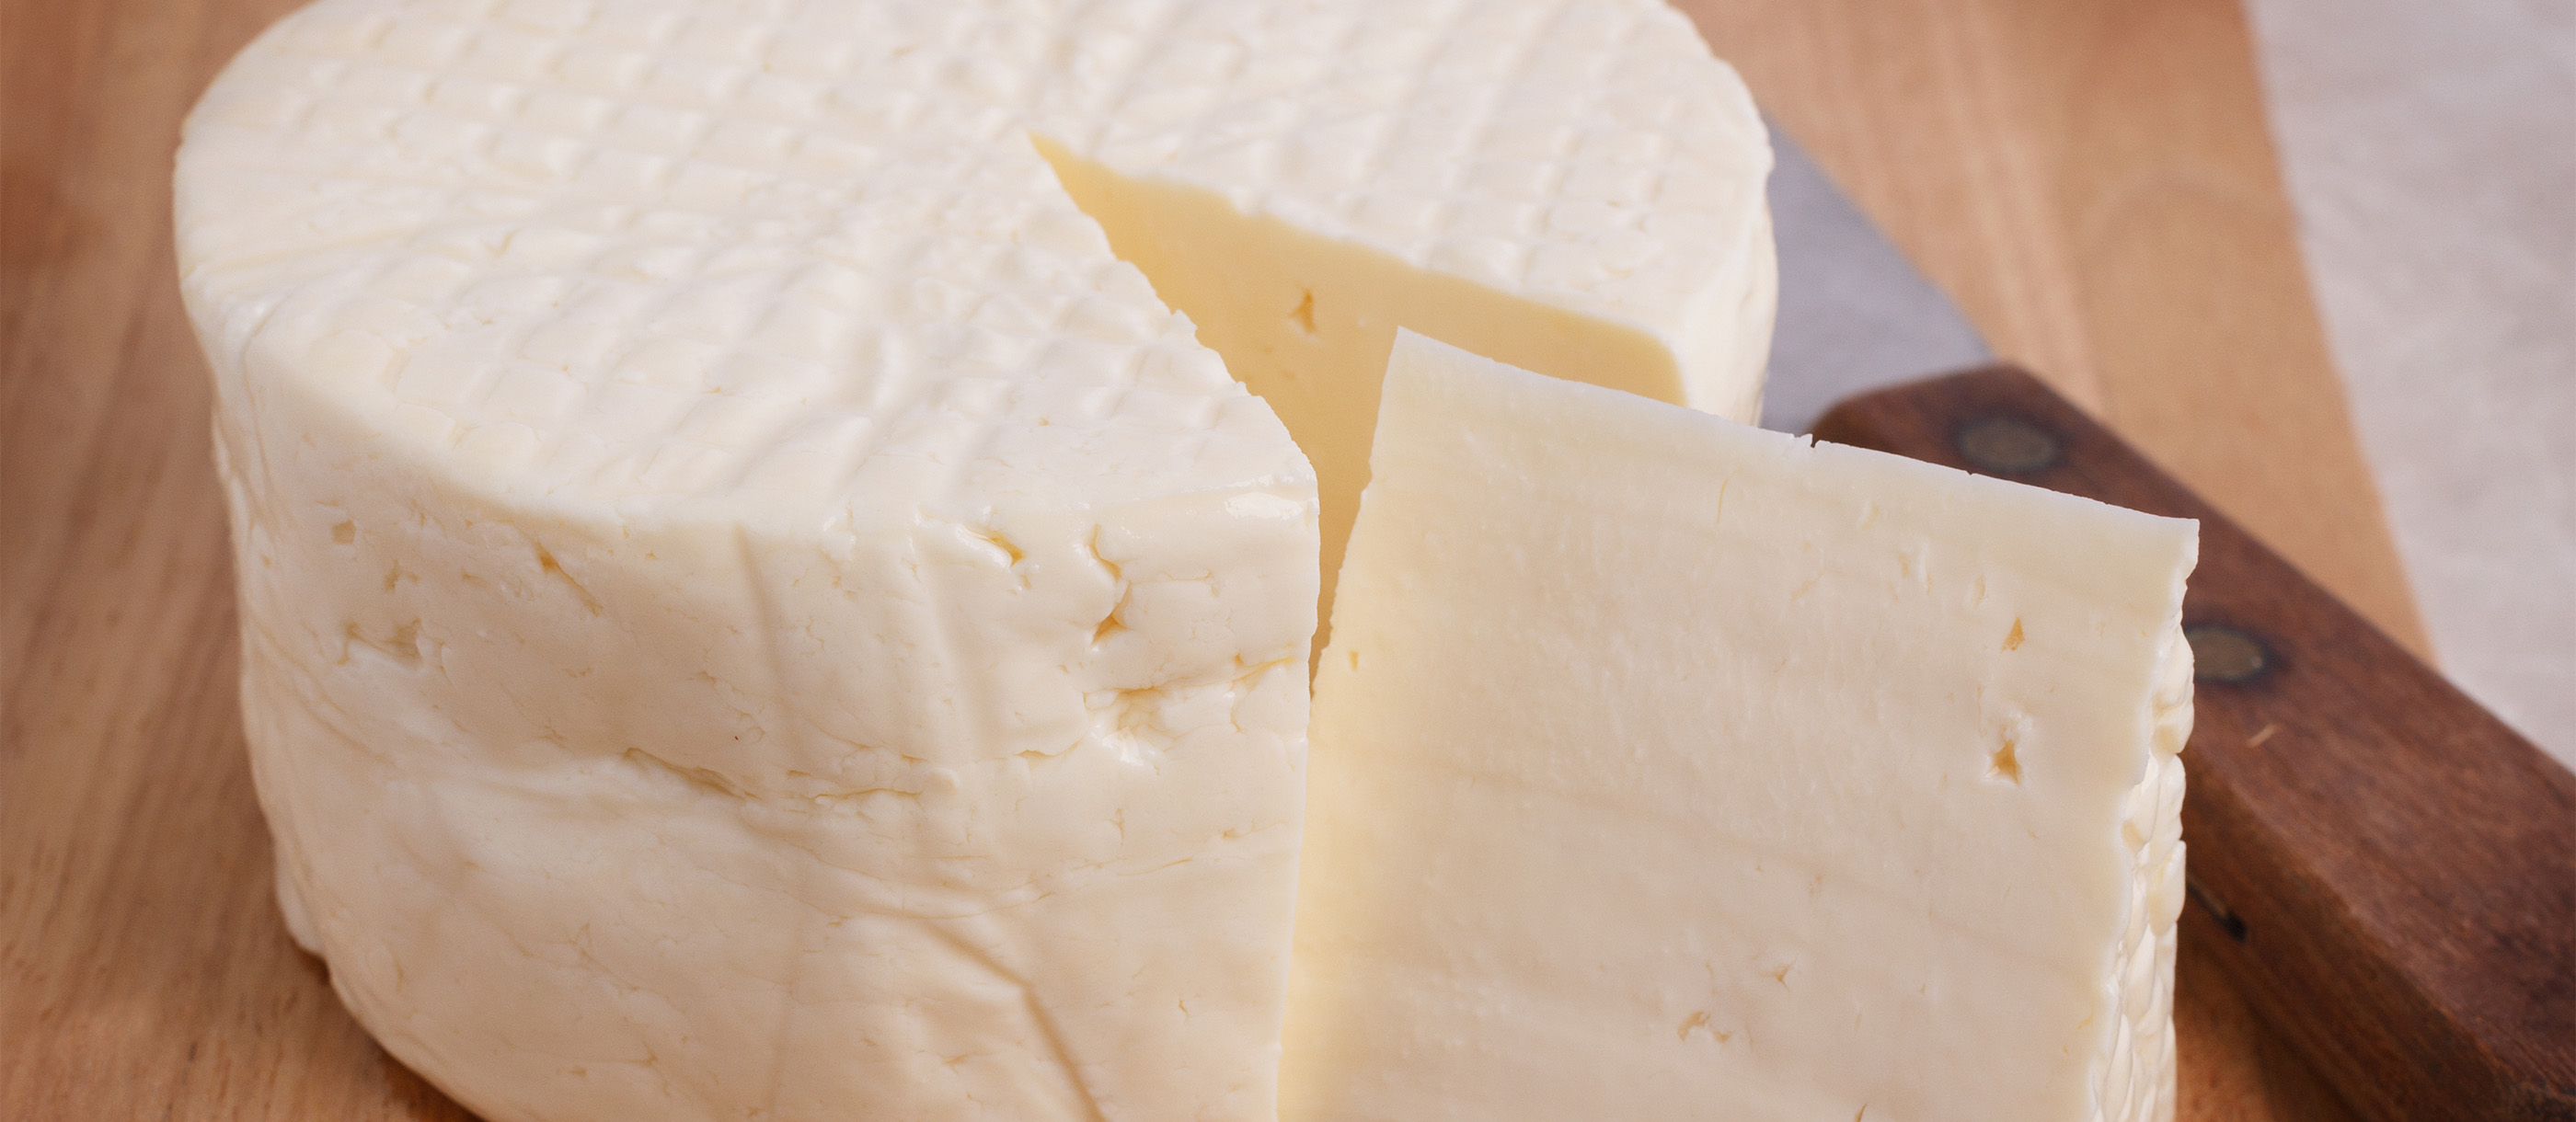 South American Cheeses: 12 Cheese Types in South America | TasteAtlas